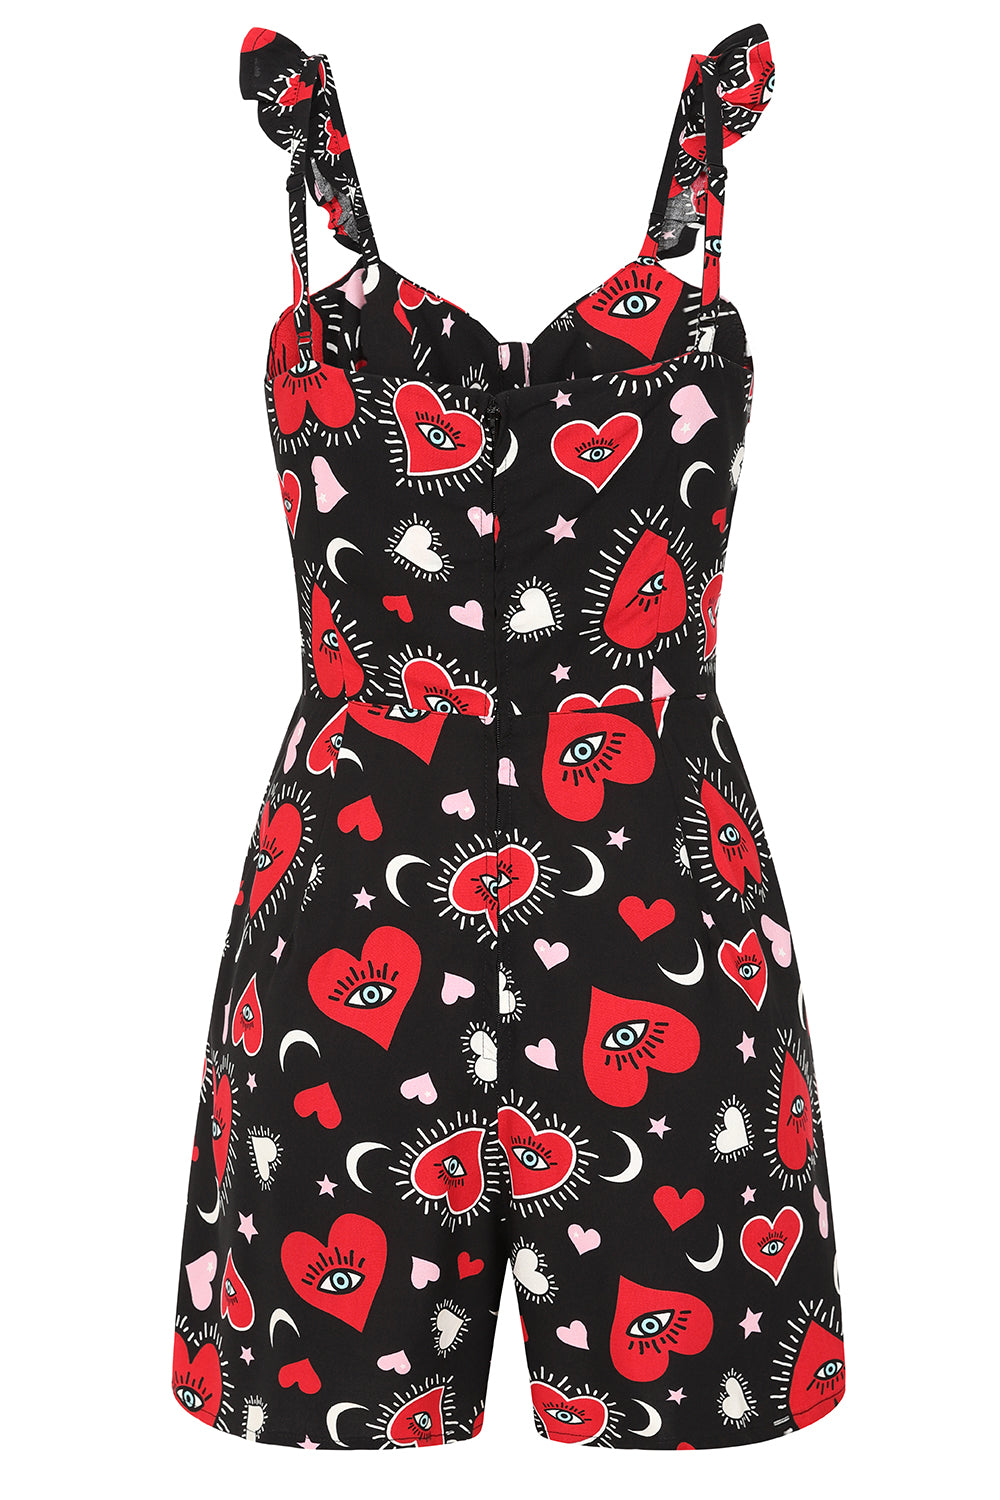 Kate Heart Playsuit by Hell Bunny